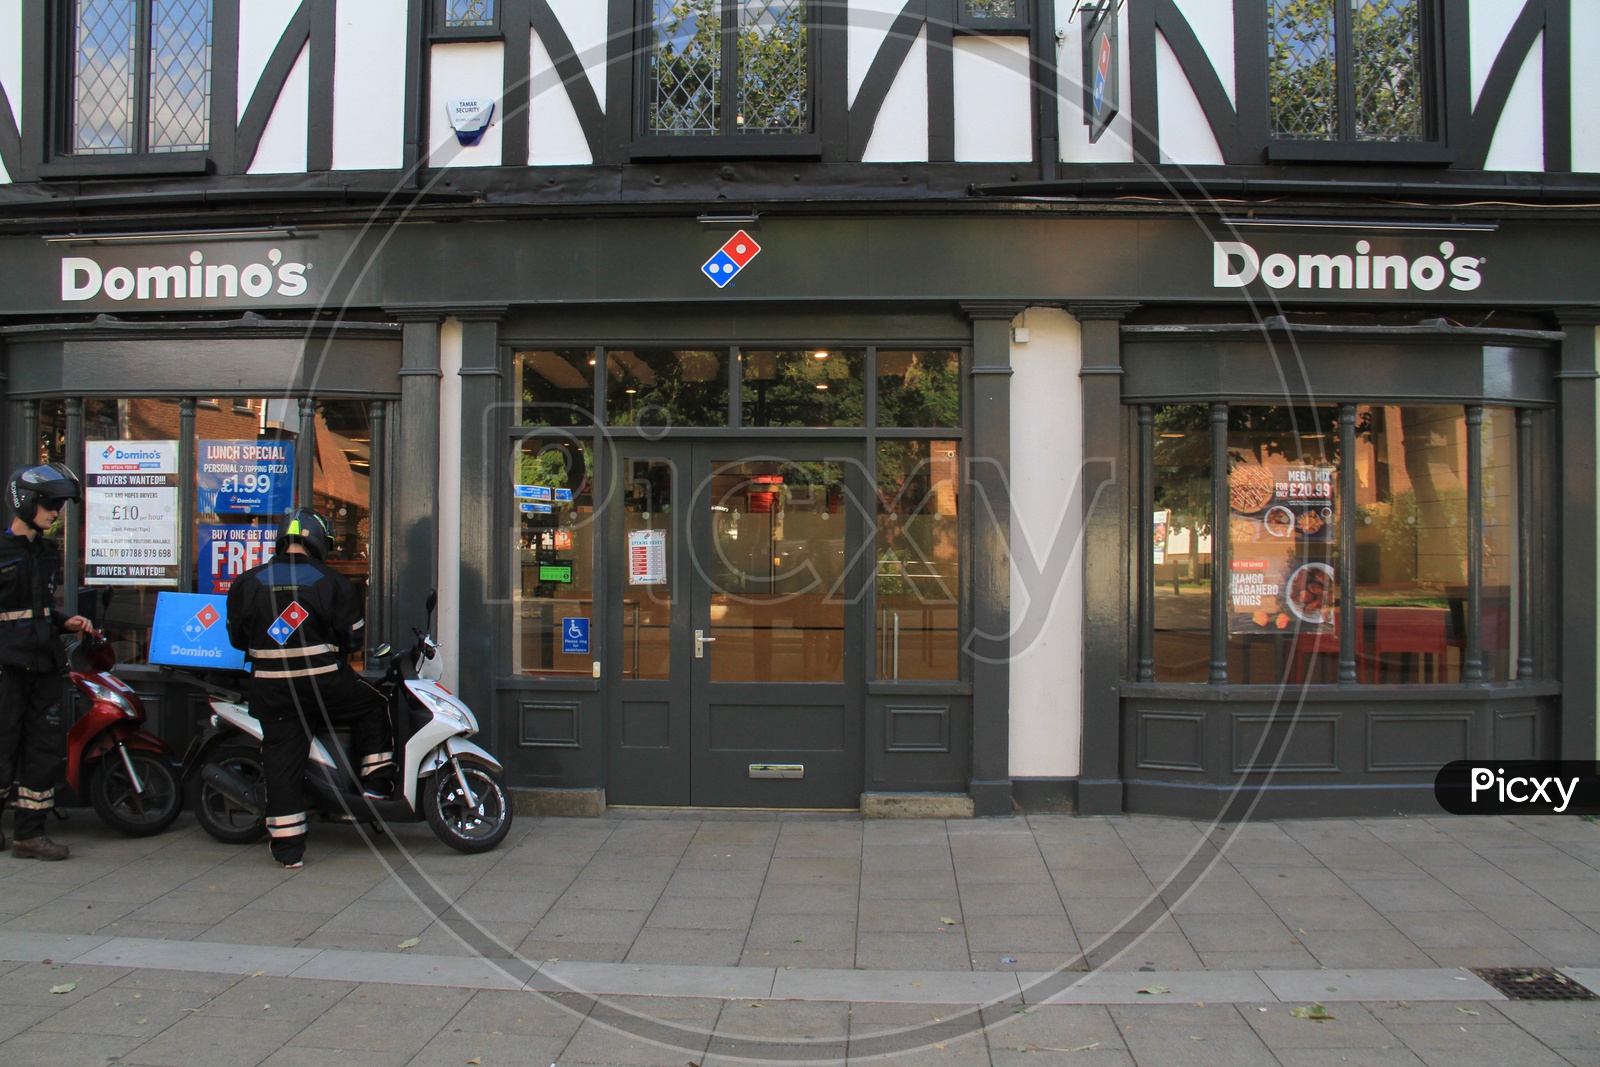 Domino's Delivery Boys with Bikes at Outlet